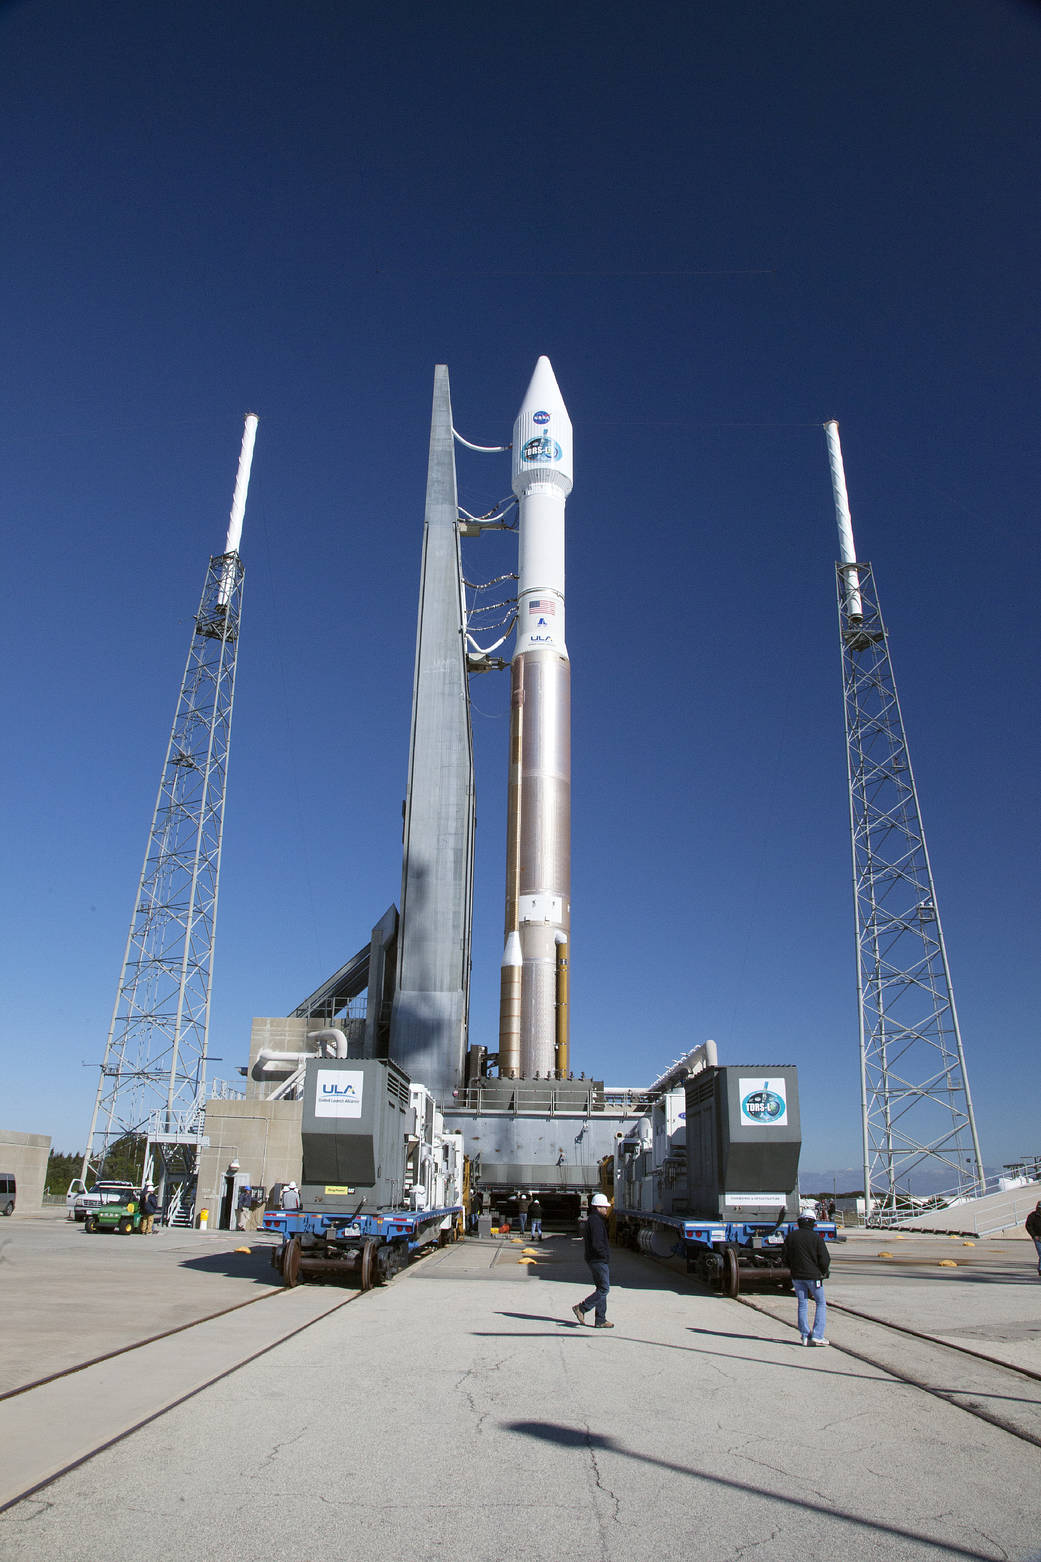 A United Launch Alliance Atlas V rocket with NASA's Tracking and Data Relay Satellite (TDRS-L) spacecraft on board arrives at th